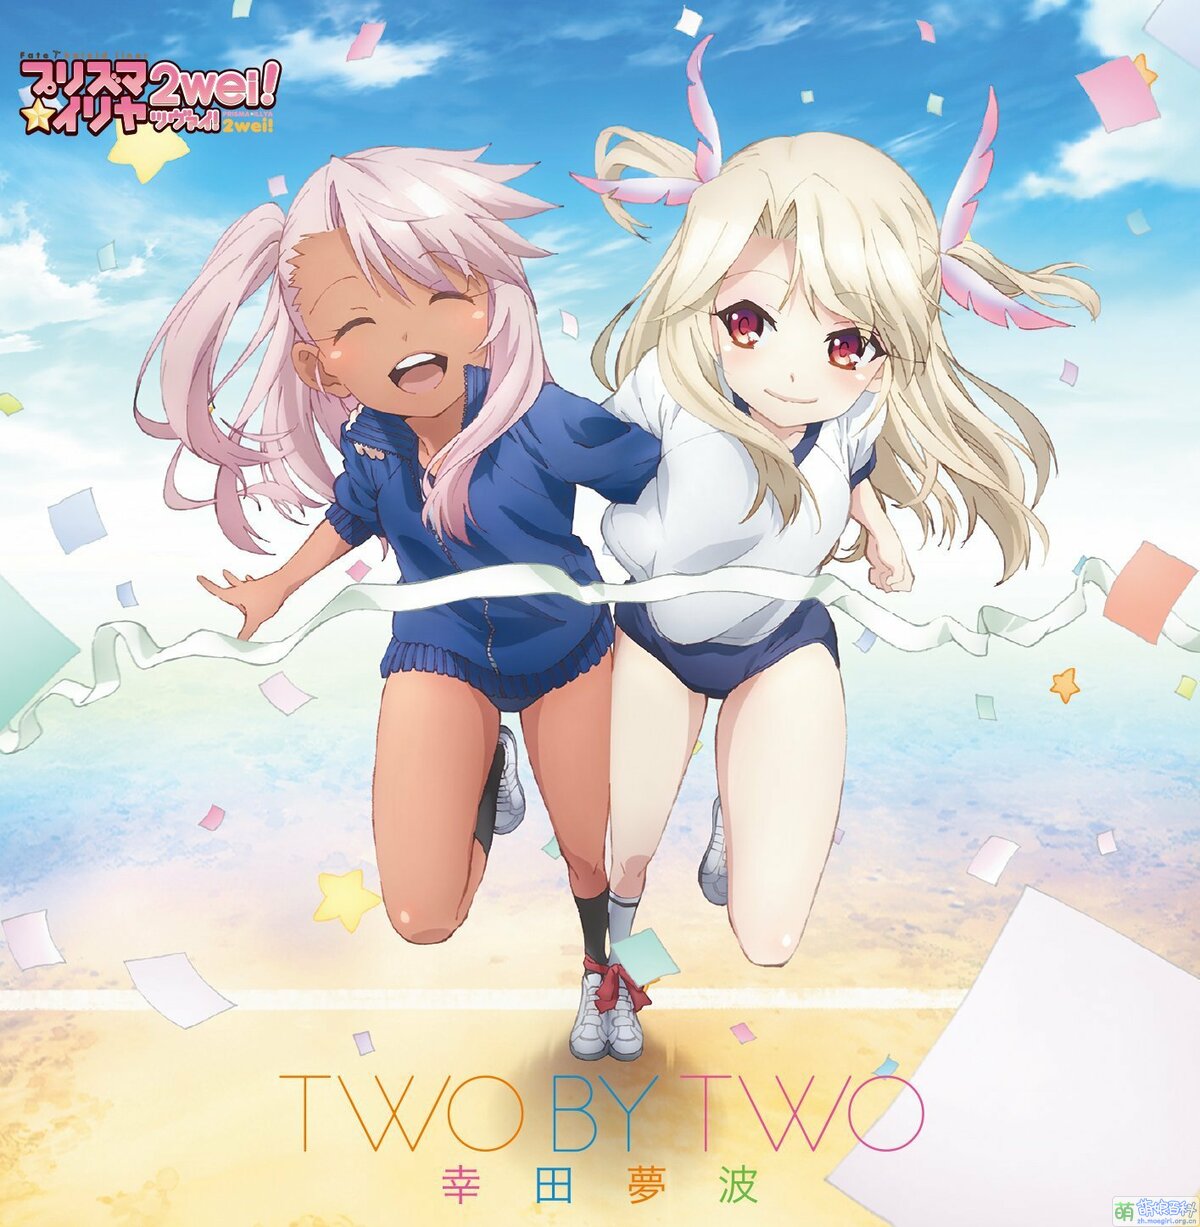 Two By Two 萌娘百科萬物皆可萌的百科全書